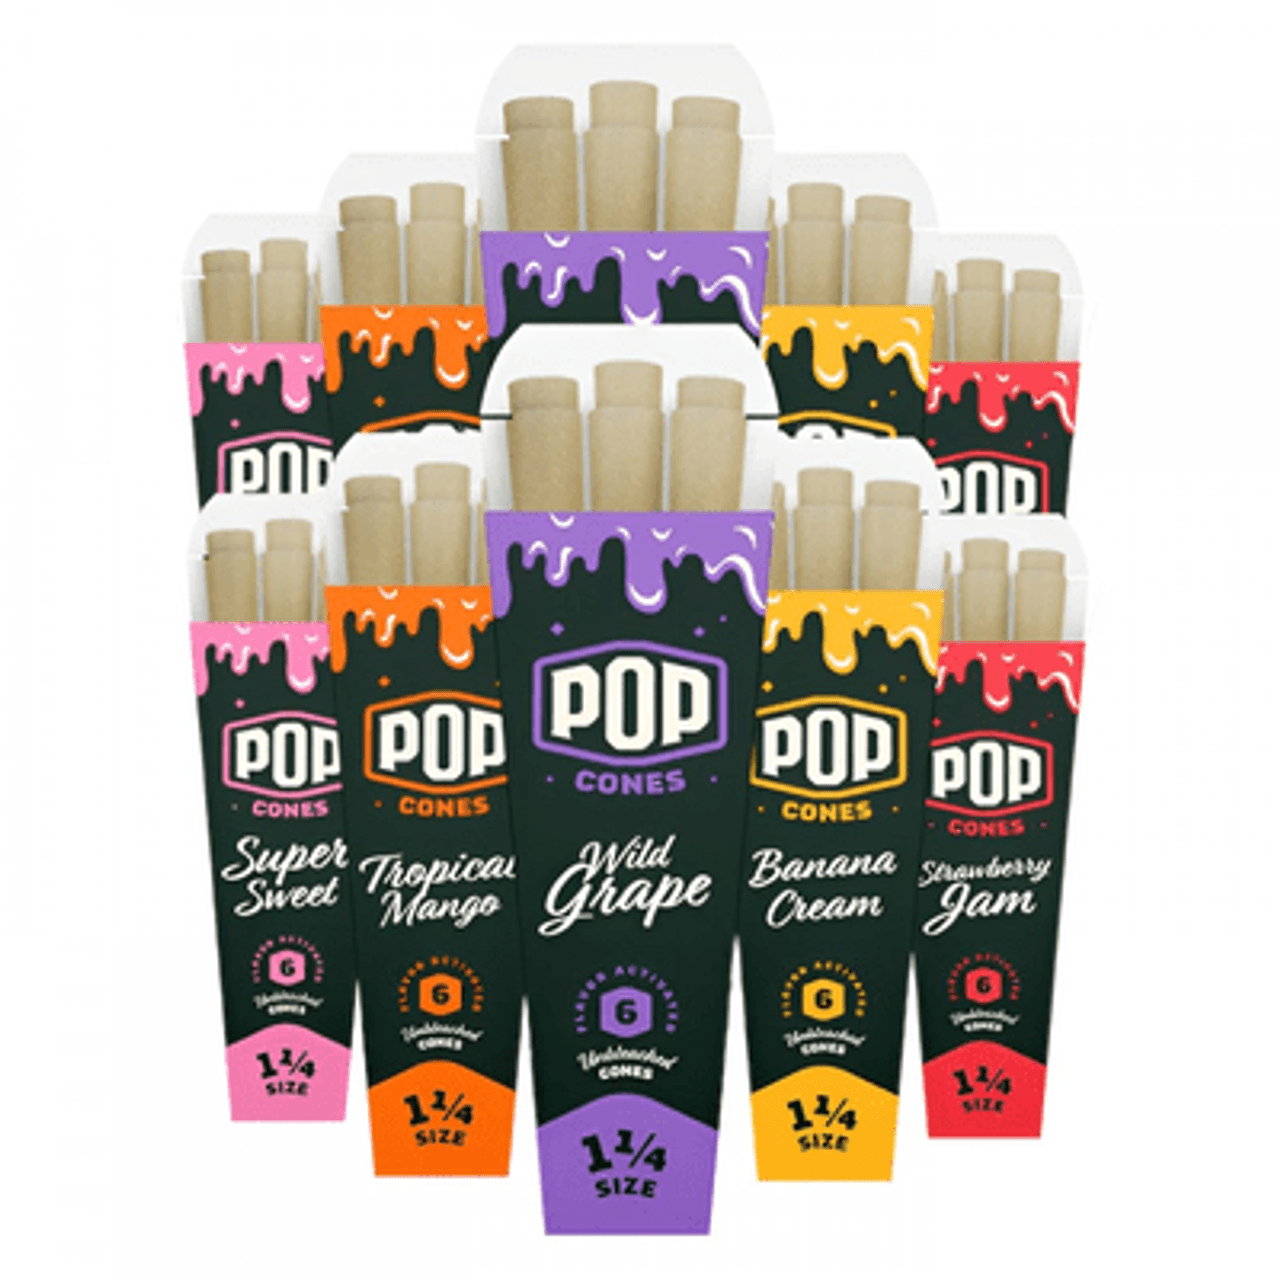 Pop Cones UNBLEACHED 1 1/4 Size Pre-Rolled Retail Cones | Variety Pack